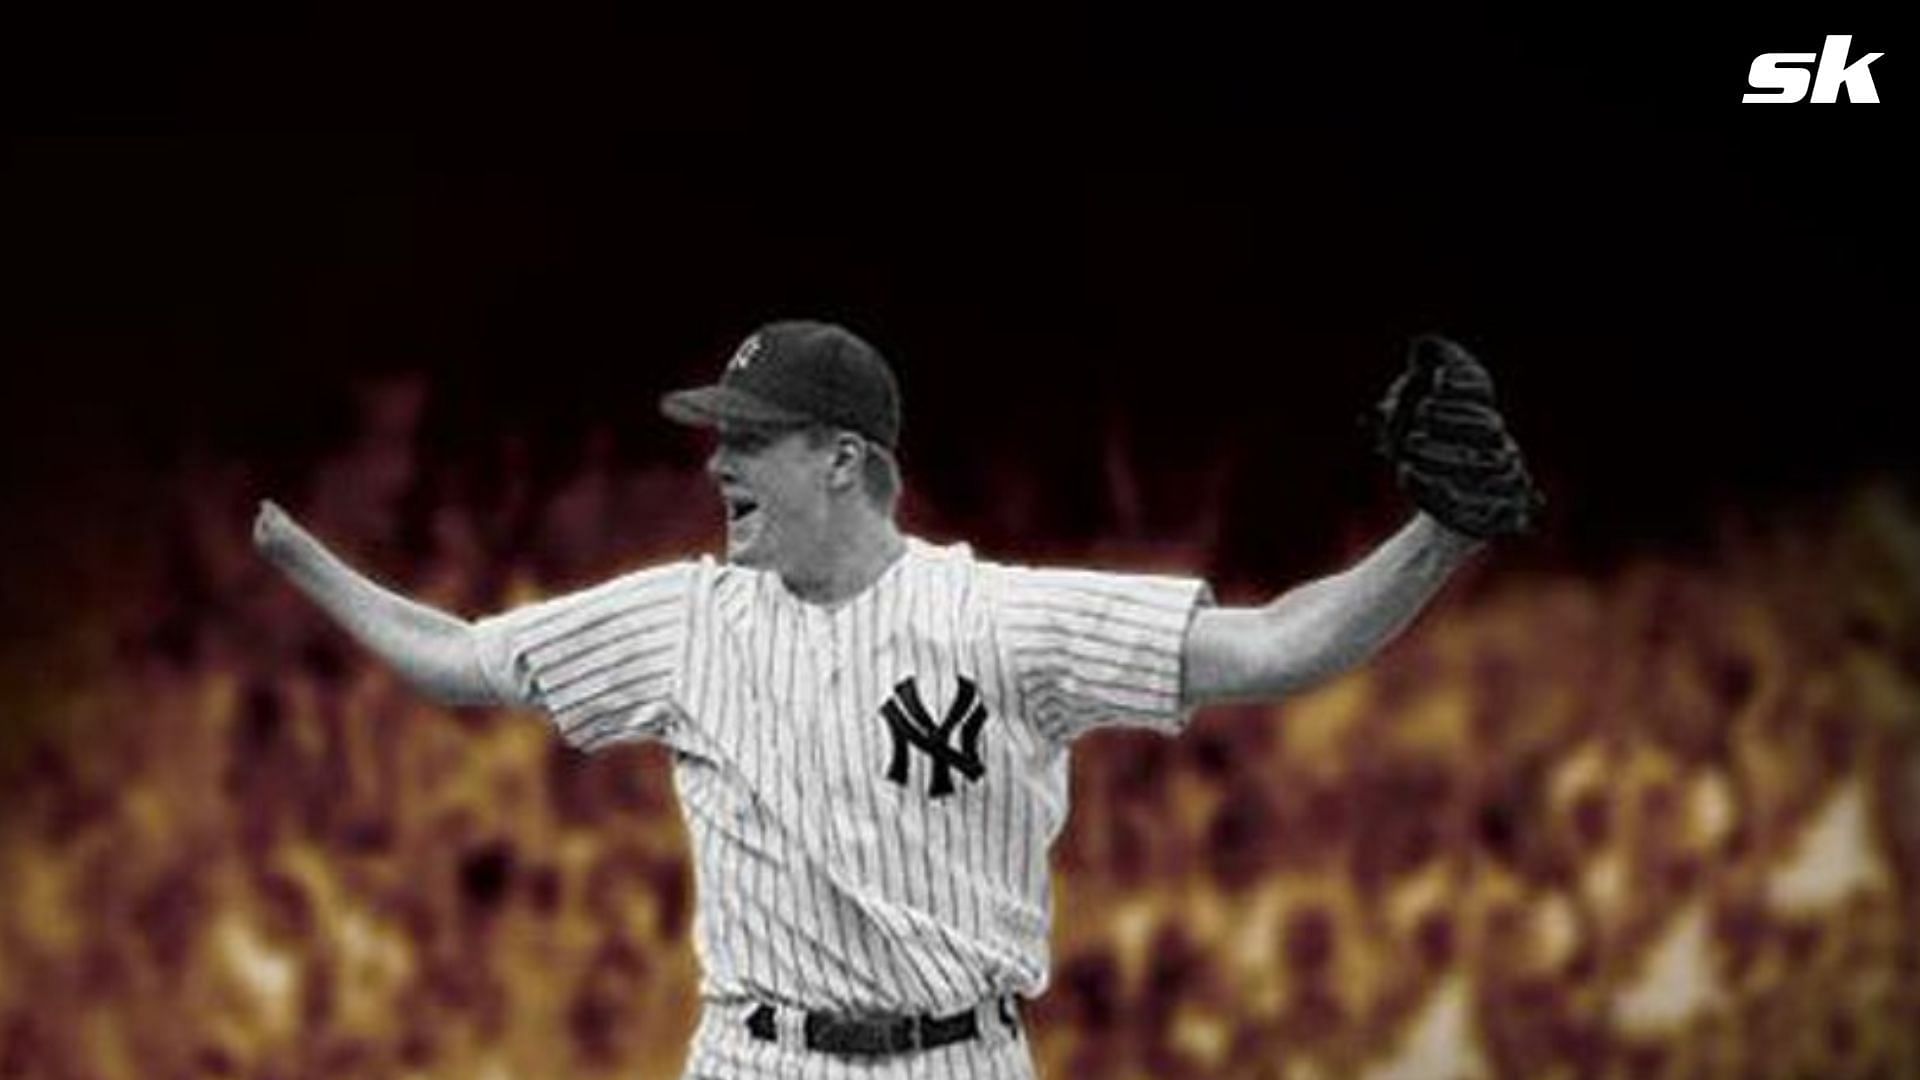 One-handed pitcher Jim Abbott once got candid about his inspirational  career in MLB, pitching with one arm